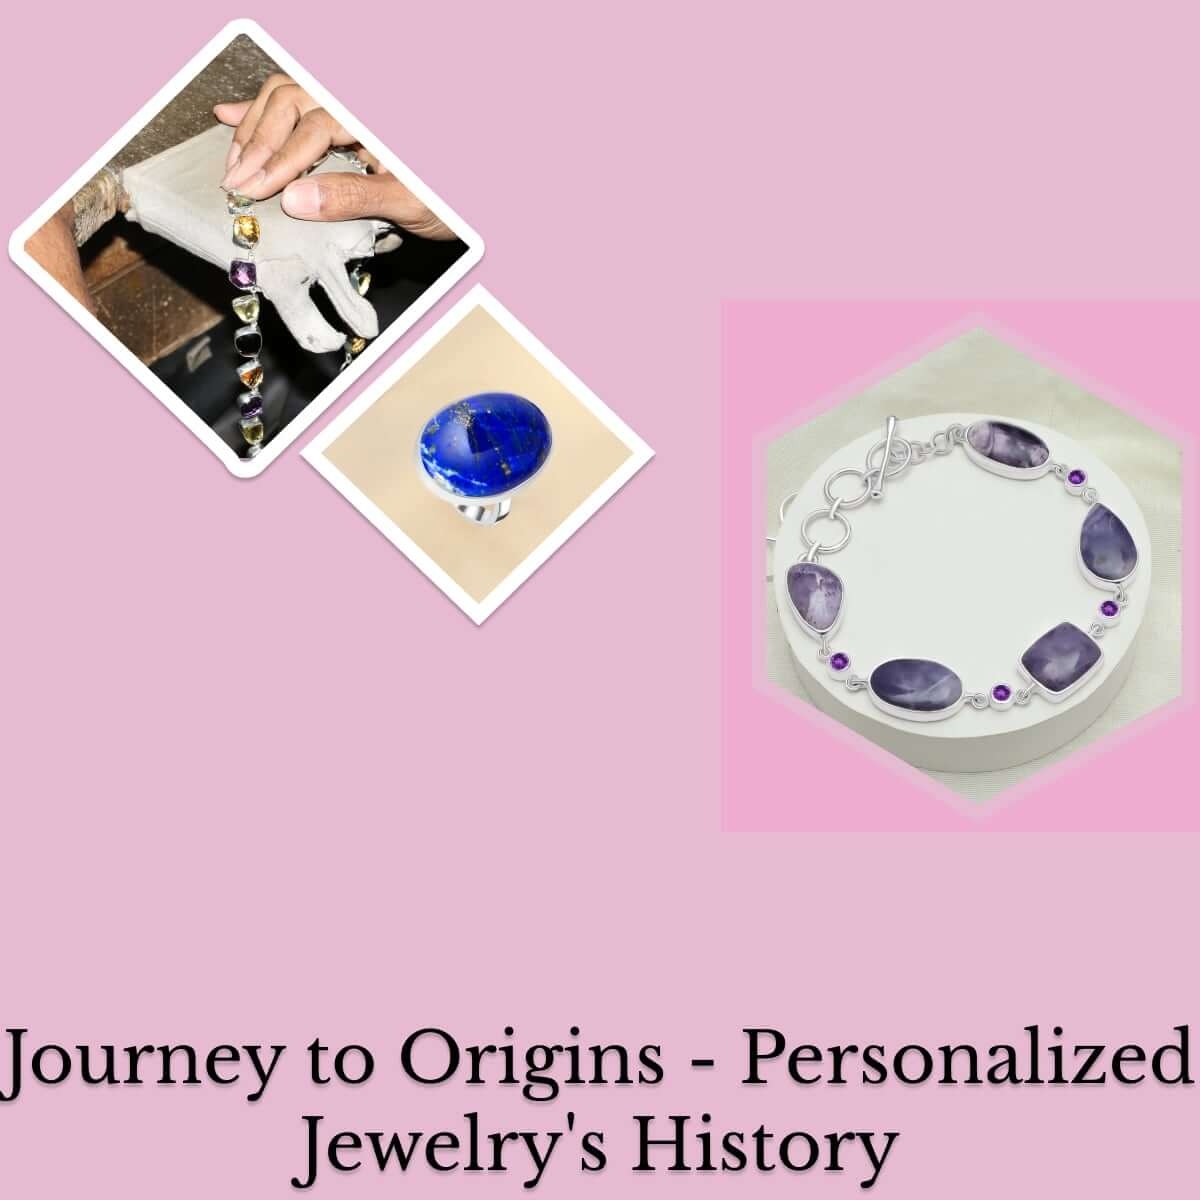 Historical Roots of Personalized Jewelry